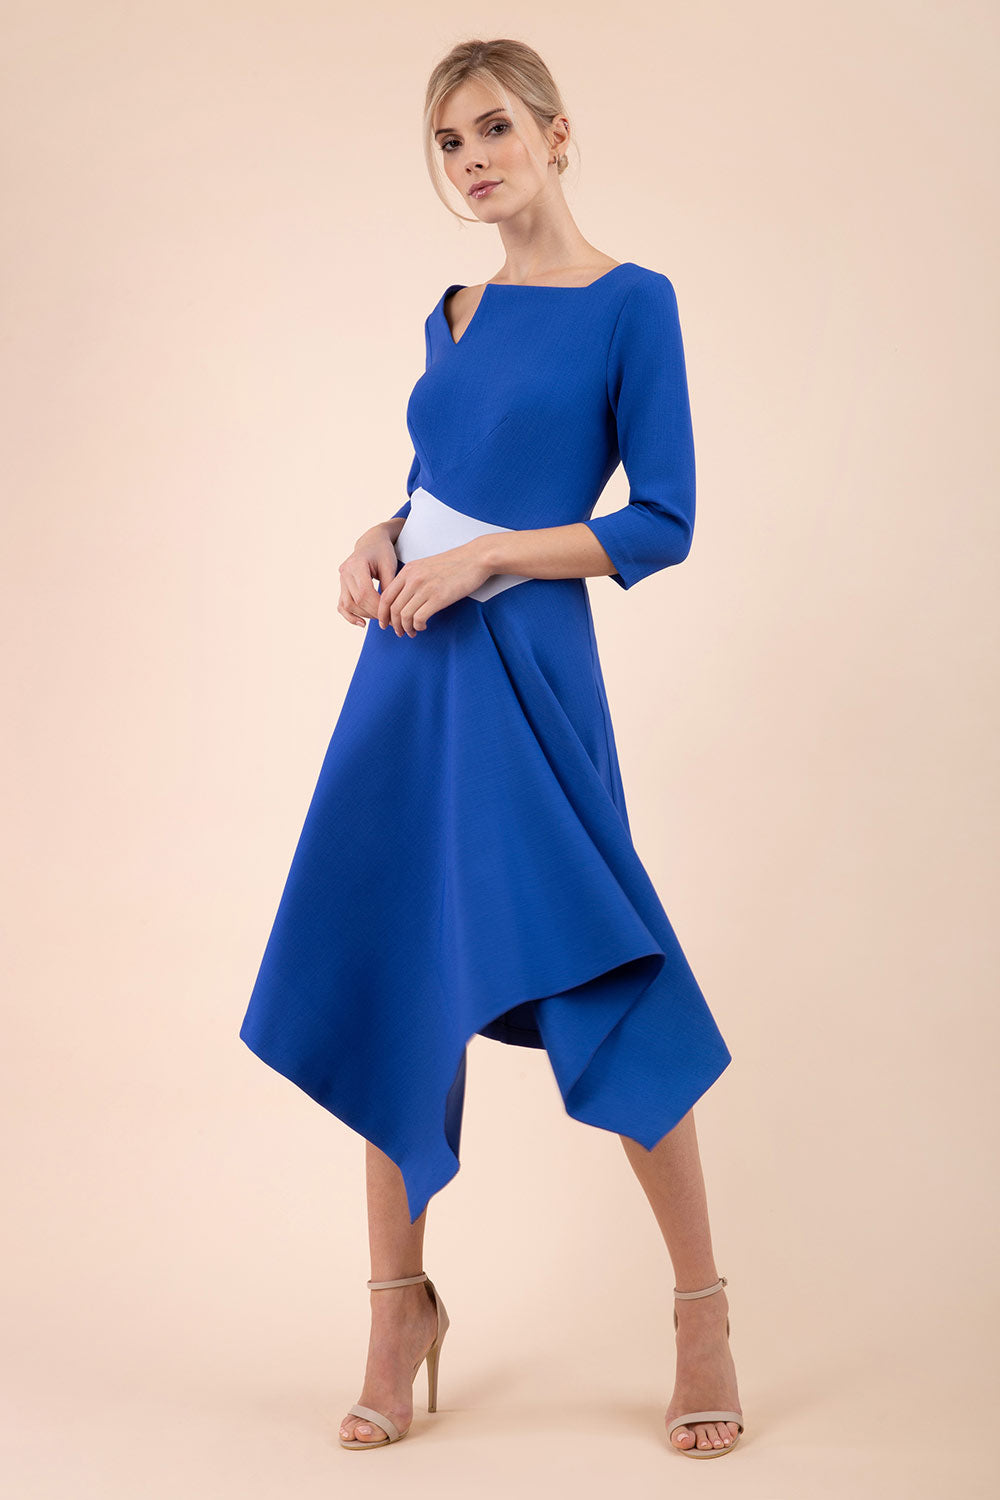 Blonde Model wearing Diva Catwalk Pinto Contrast swing a-line skirt Dress with asymmetric skirt and asymmetric neckline with three quarter sleeve in Cobalt Blue front